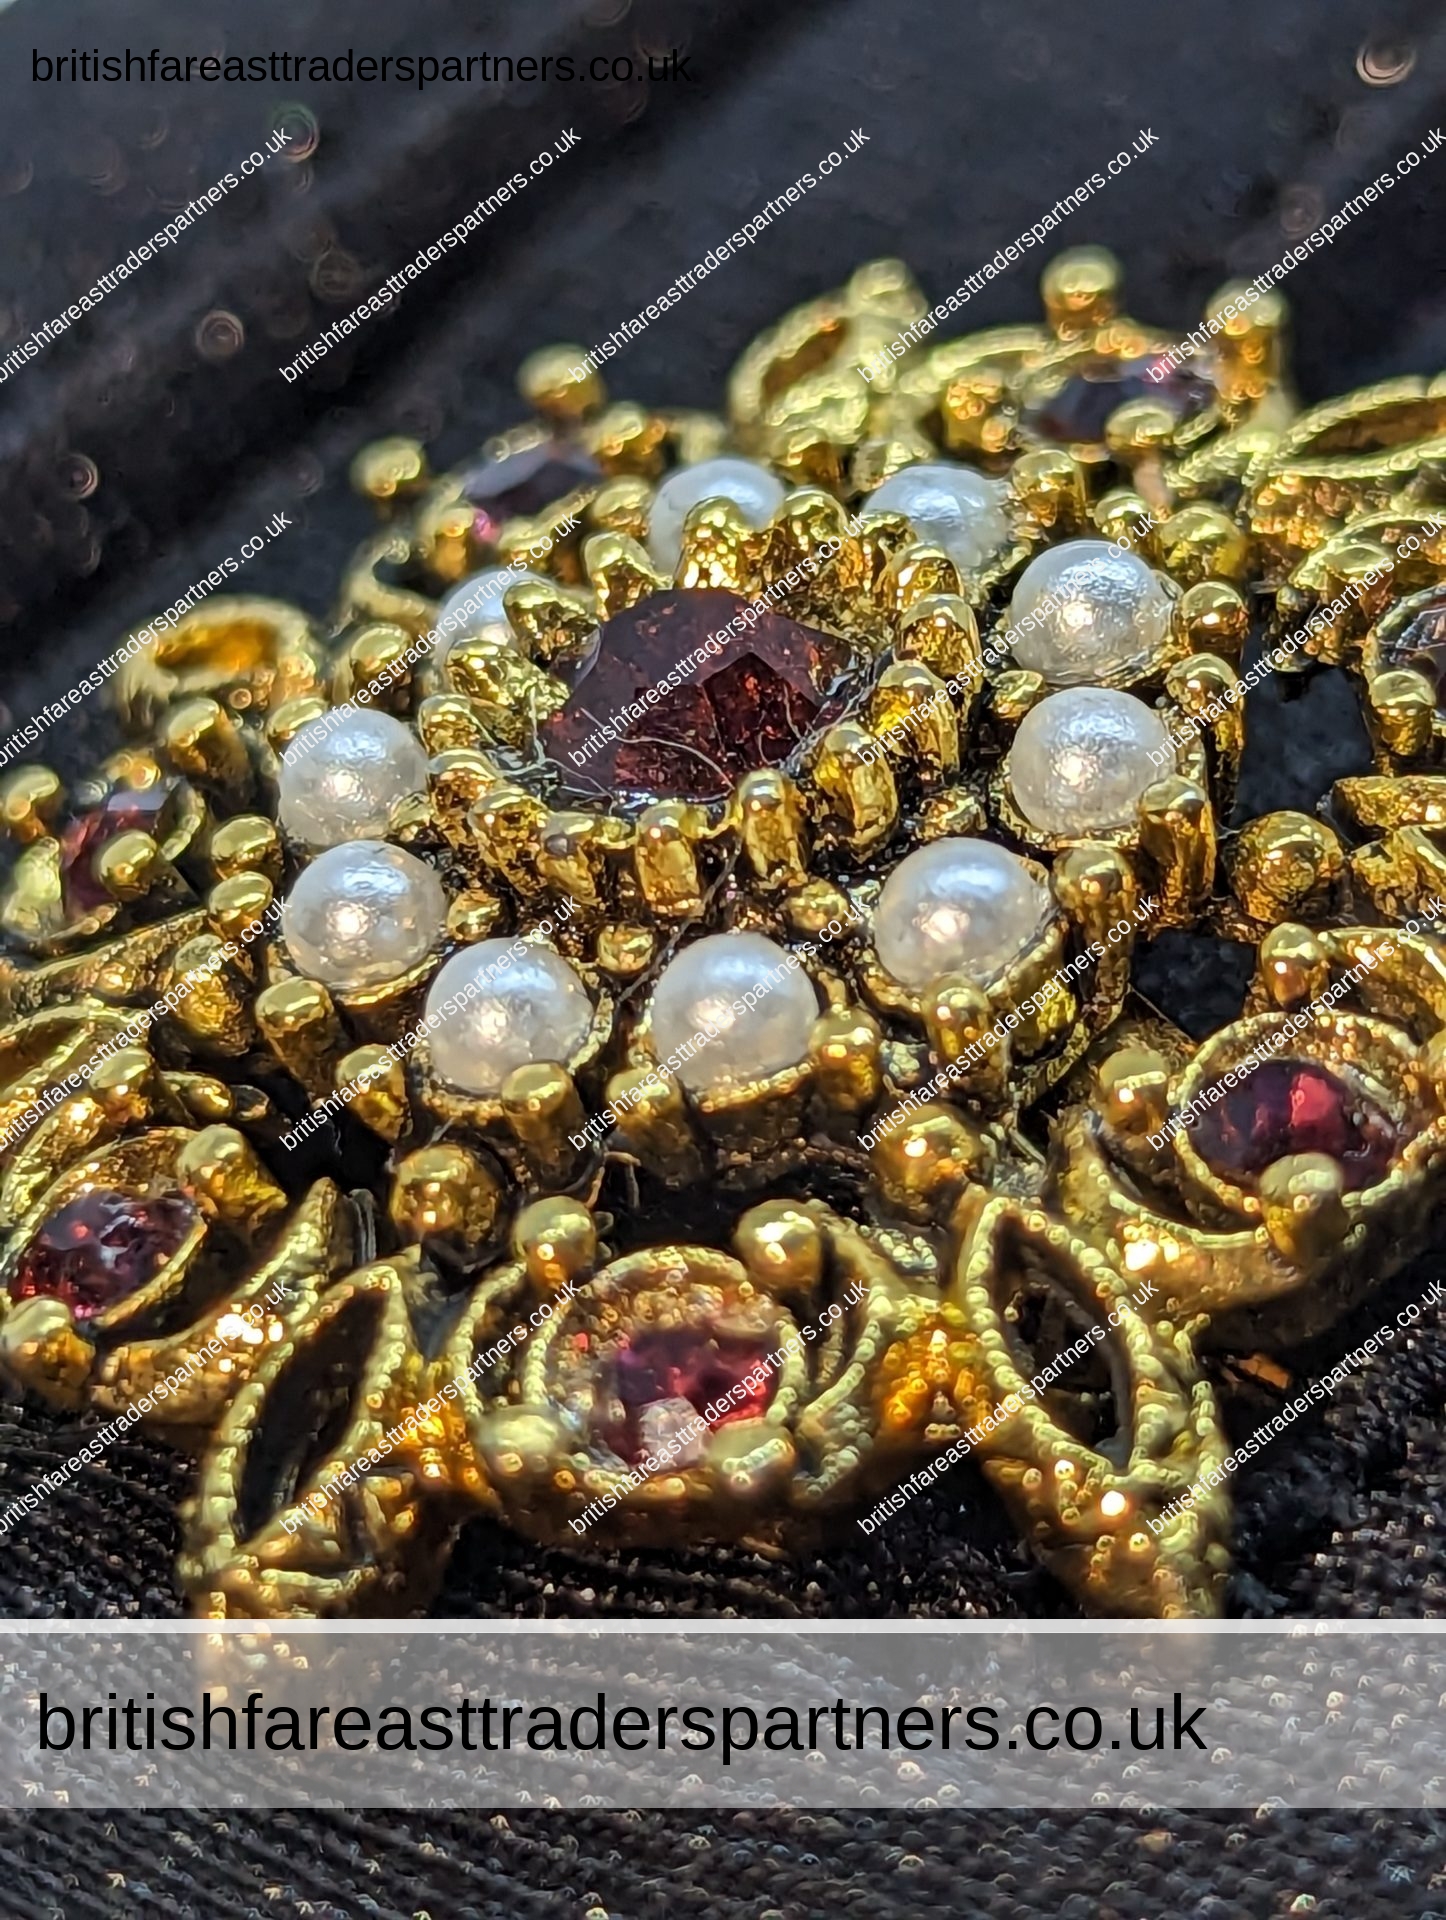 VINTAGE GEORGIAN Style GOLD FOIL + Faux Seed Perals & Glass Rubies FLORAL BROOCH